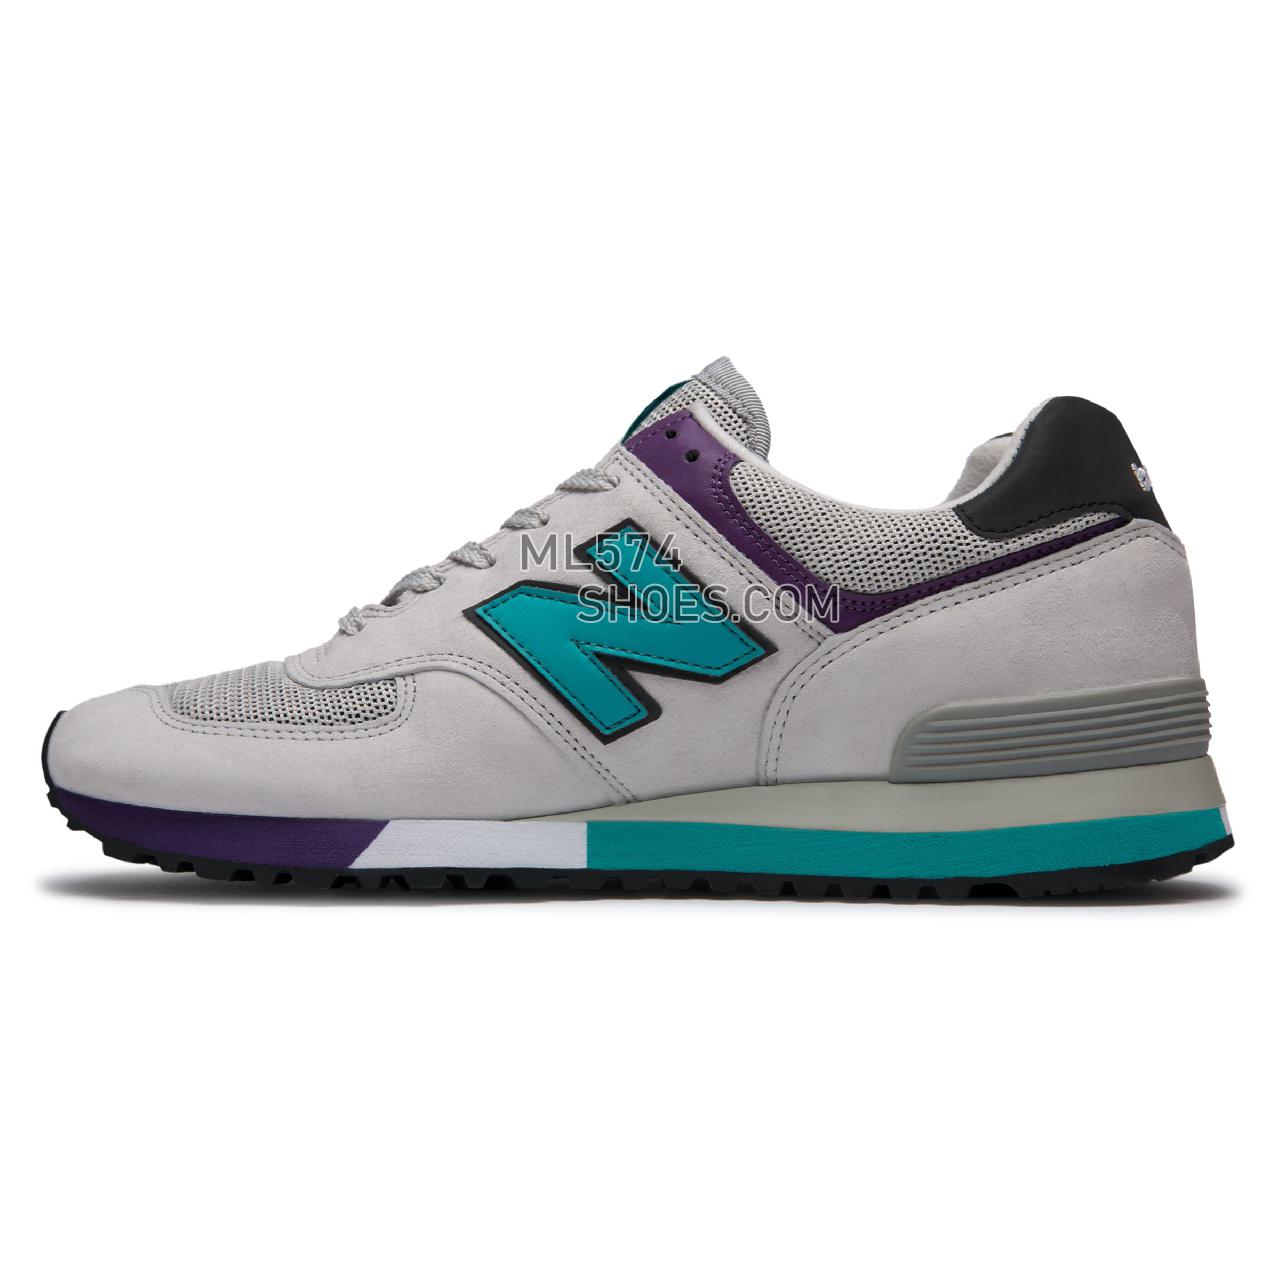 New Balance 576 Made in UK - Men's 576 - Classic Off White with Teal - OM576GPM